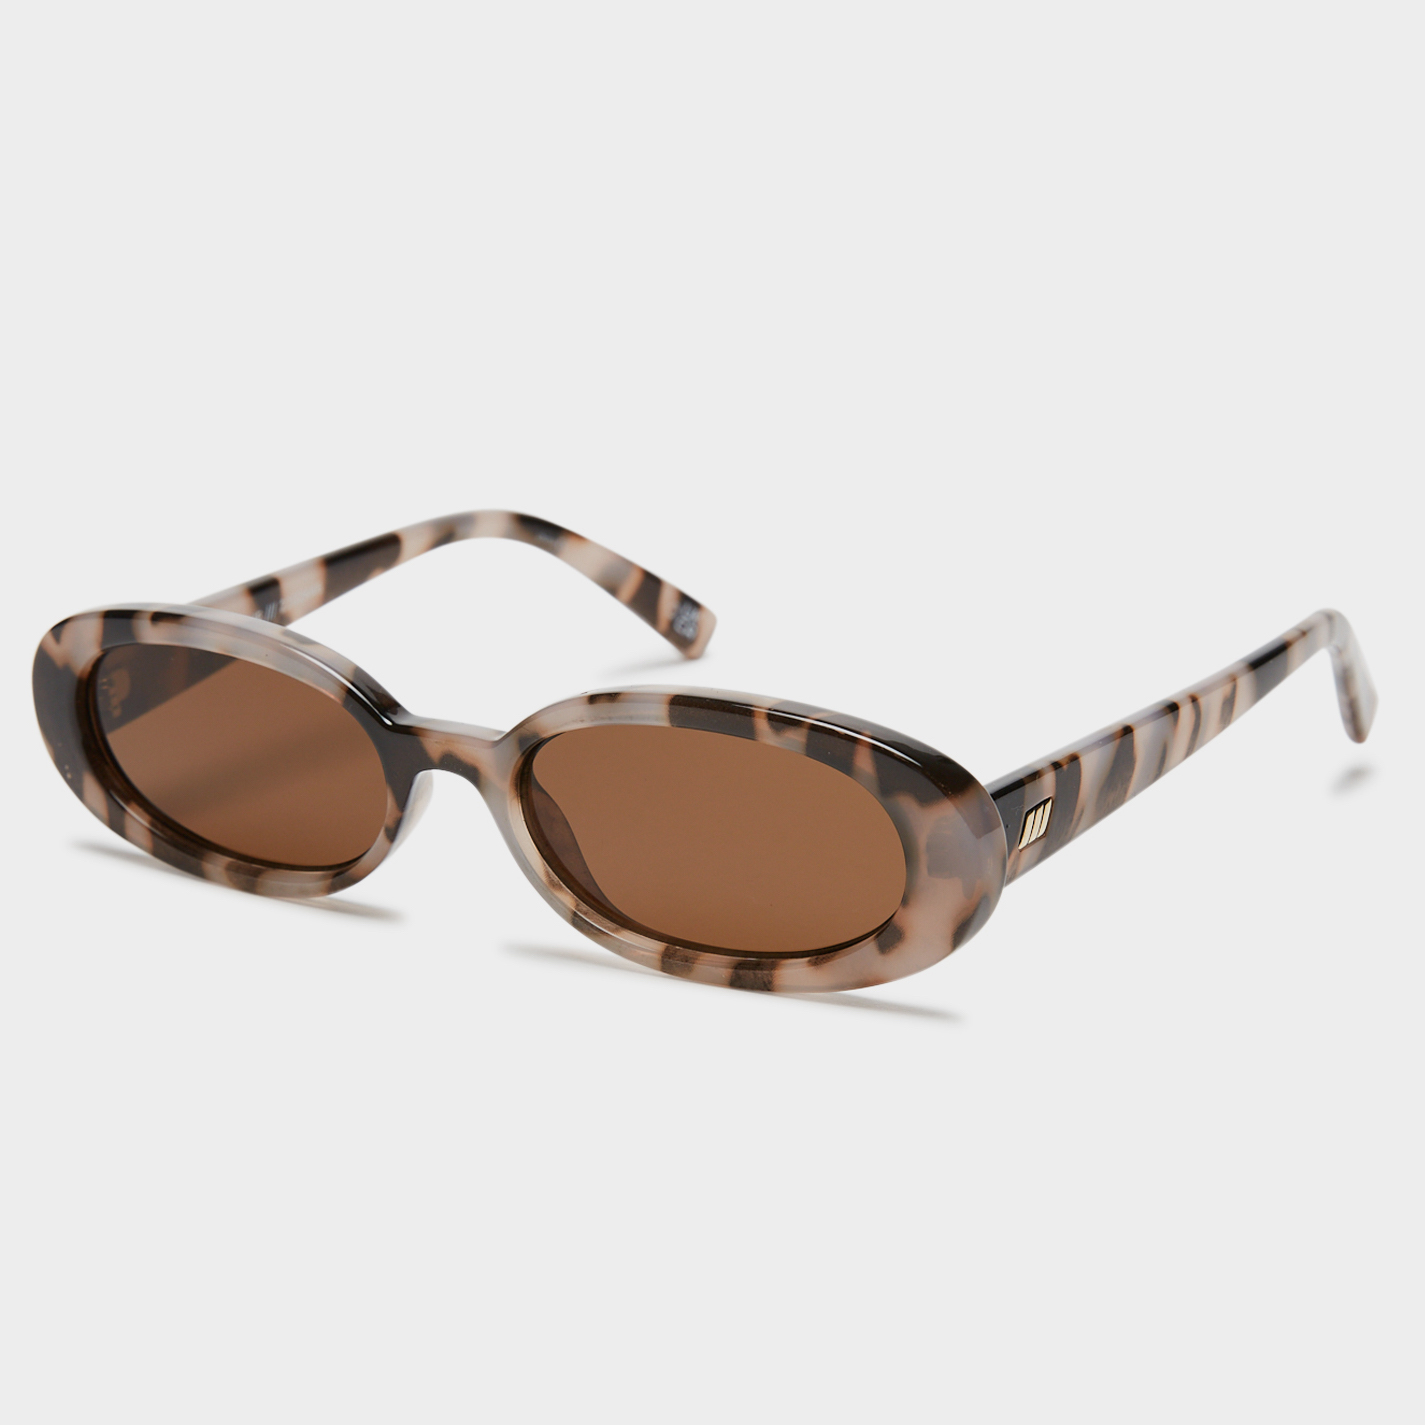 Outta Love Oval Sunglasses - Cookie Tort/Brown